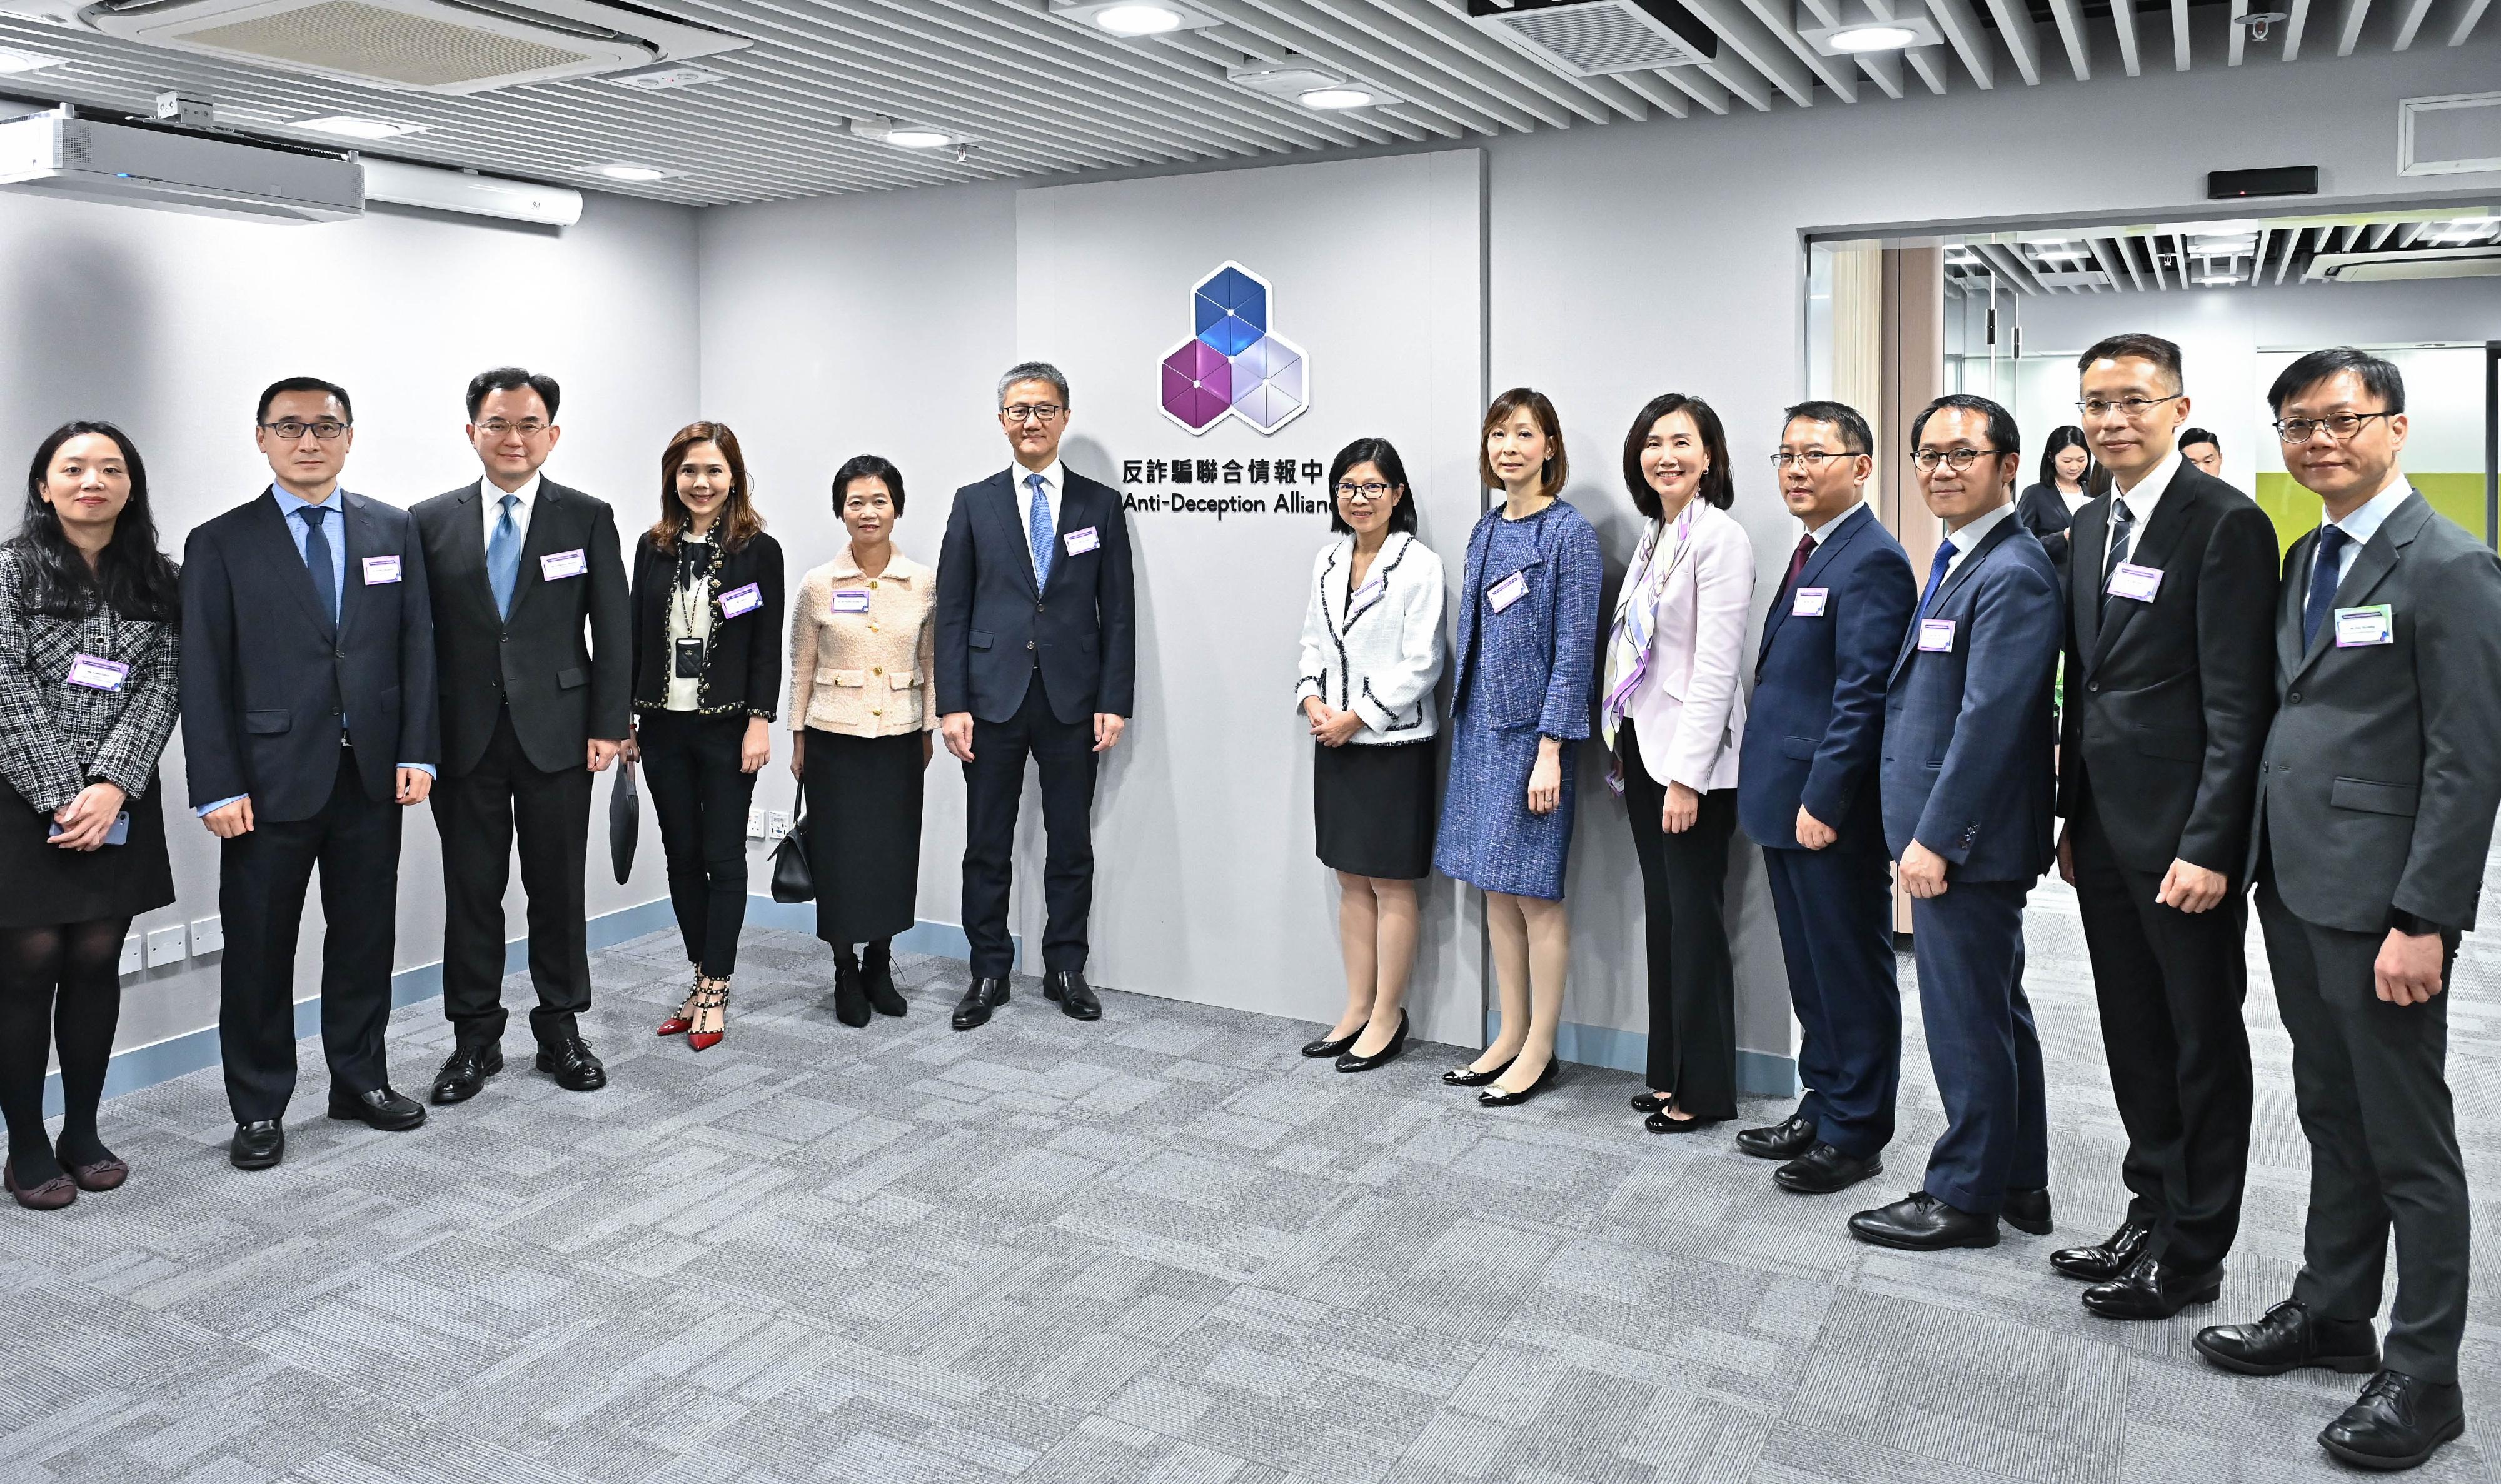 The Hong Kong Police Force (HKPF) held the inauguration ceremony for the Anti-Deception Alliance today (November 24). Photo shows the Commissioner of Police, Mr Siu Chak-yee (sixth left); the Executive Director (Enforcement and AML) of the Hong Kong Monetary Authority, Ms Carmen Chu (seventh right); Acting Chairman of the Hong Kong Association of Banks, Mr Stephen Chan (third left); and other guests after touring at the office of the Anti-Deception Alliance.